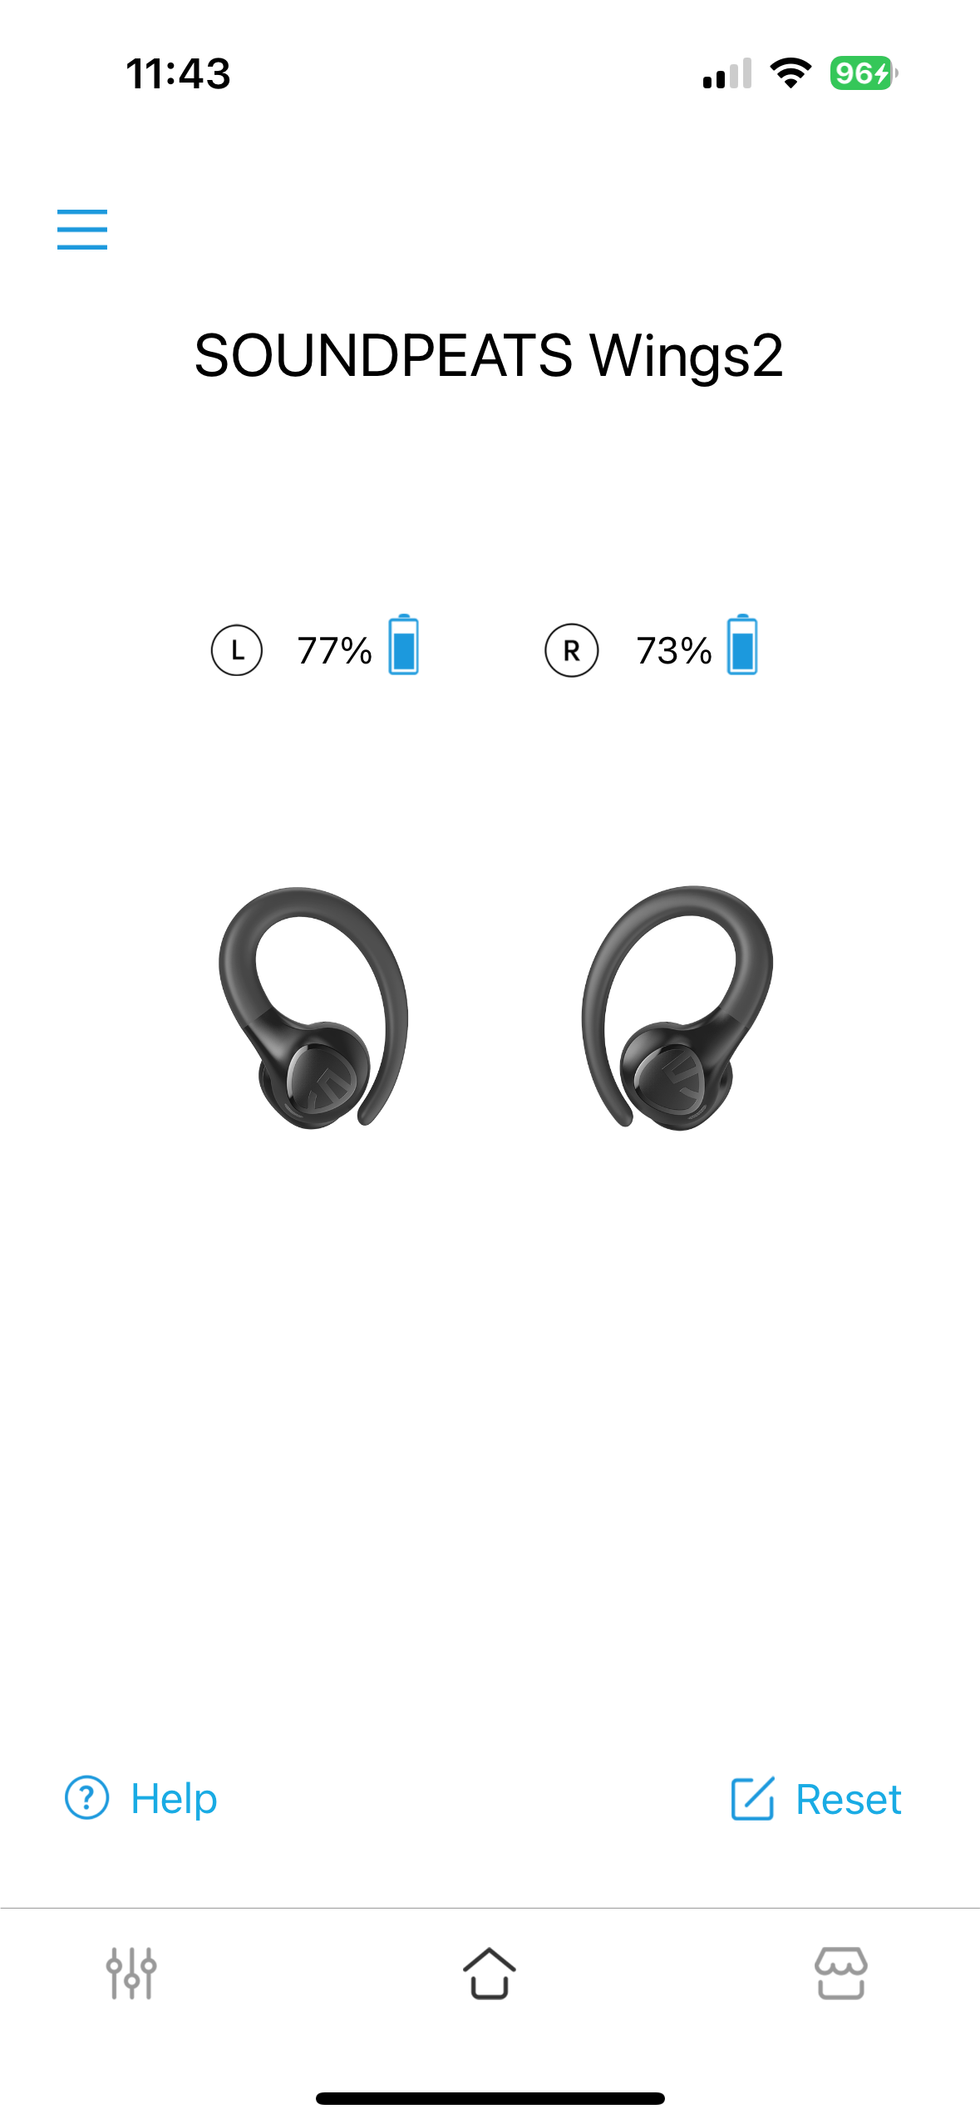 a screenshot of SoundPEATS app home page showing battery life for SoundPEATS Wings2 Earbuds